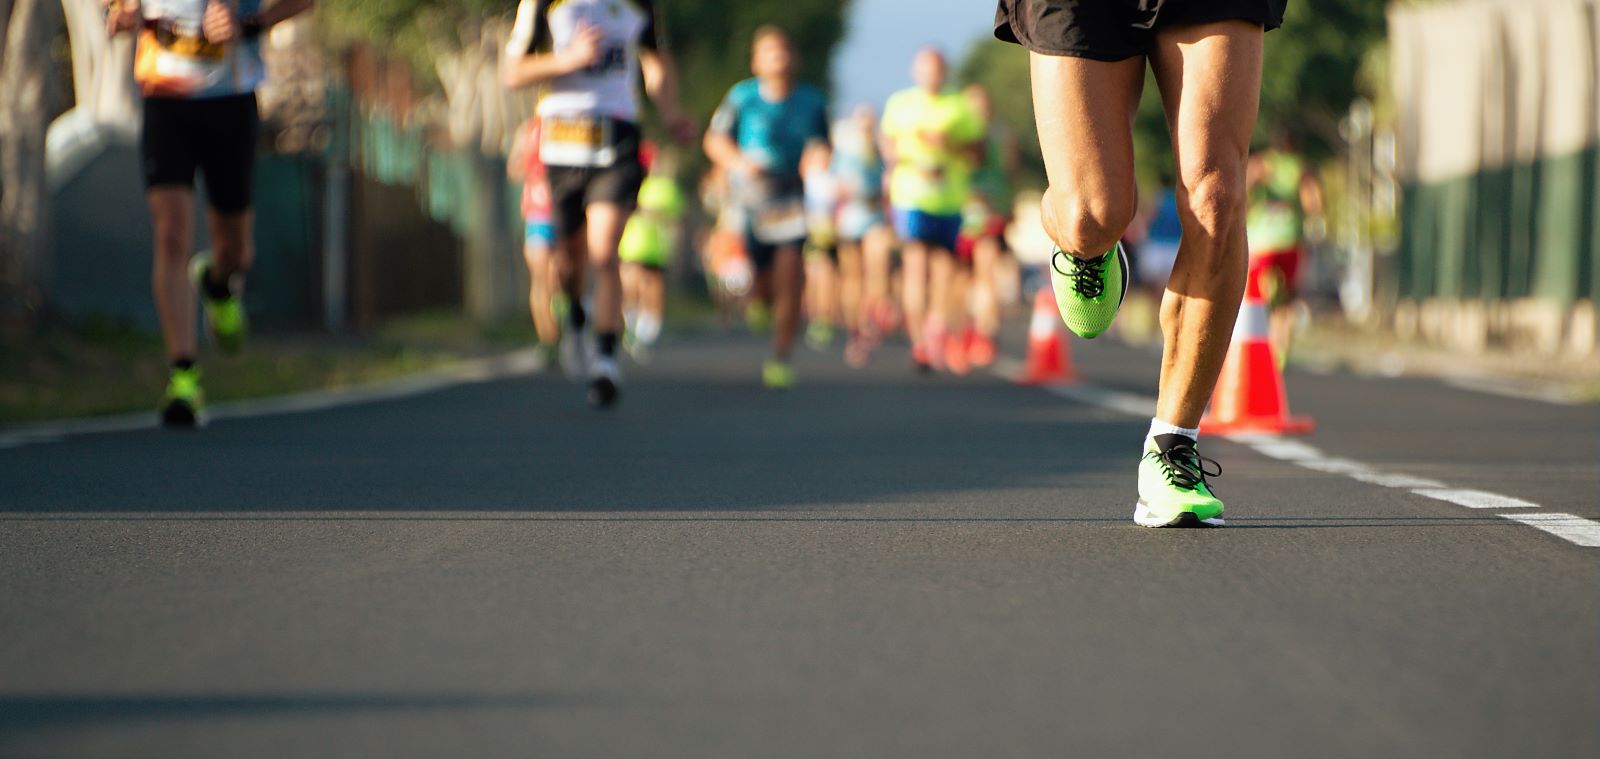 Runner’s Death Highlights Risk of High Heat for Those With Underlying Conditions